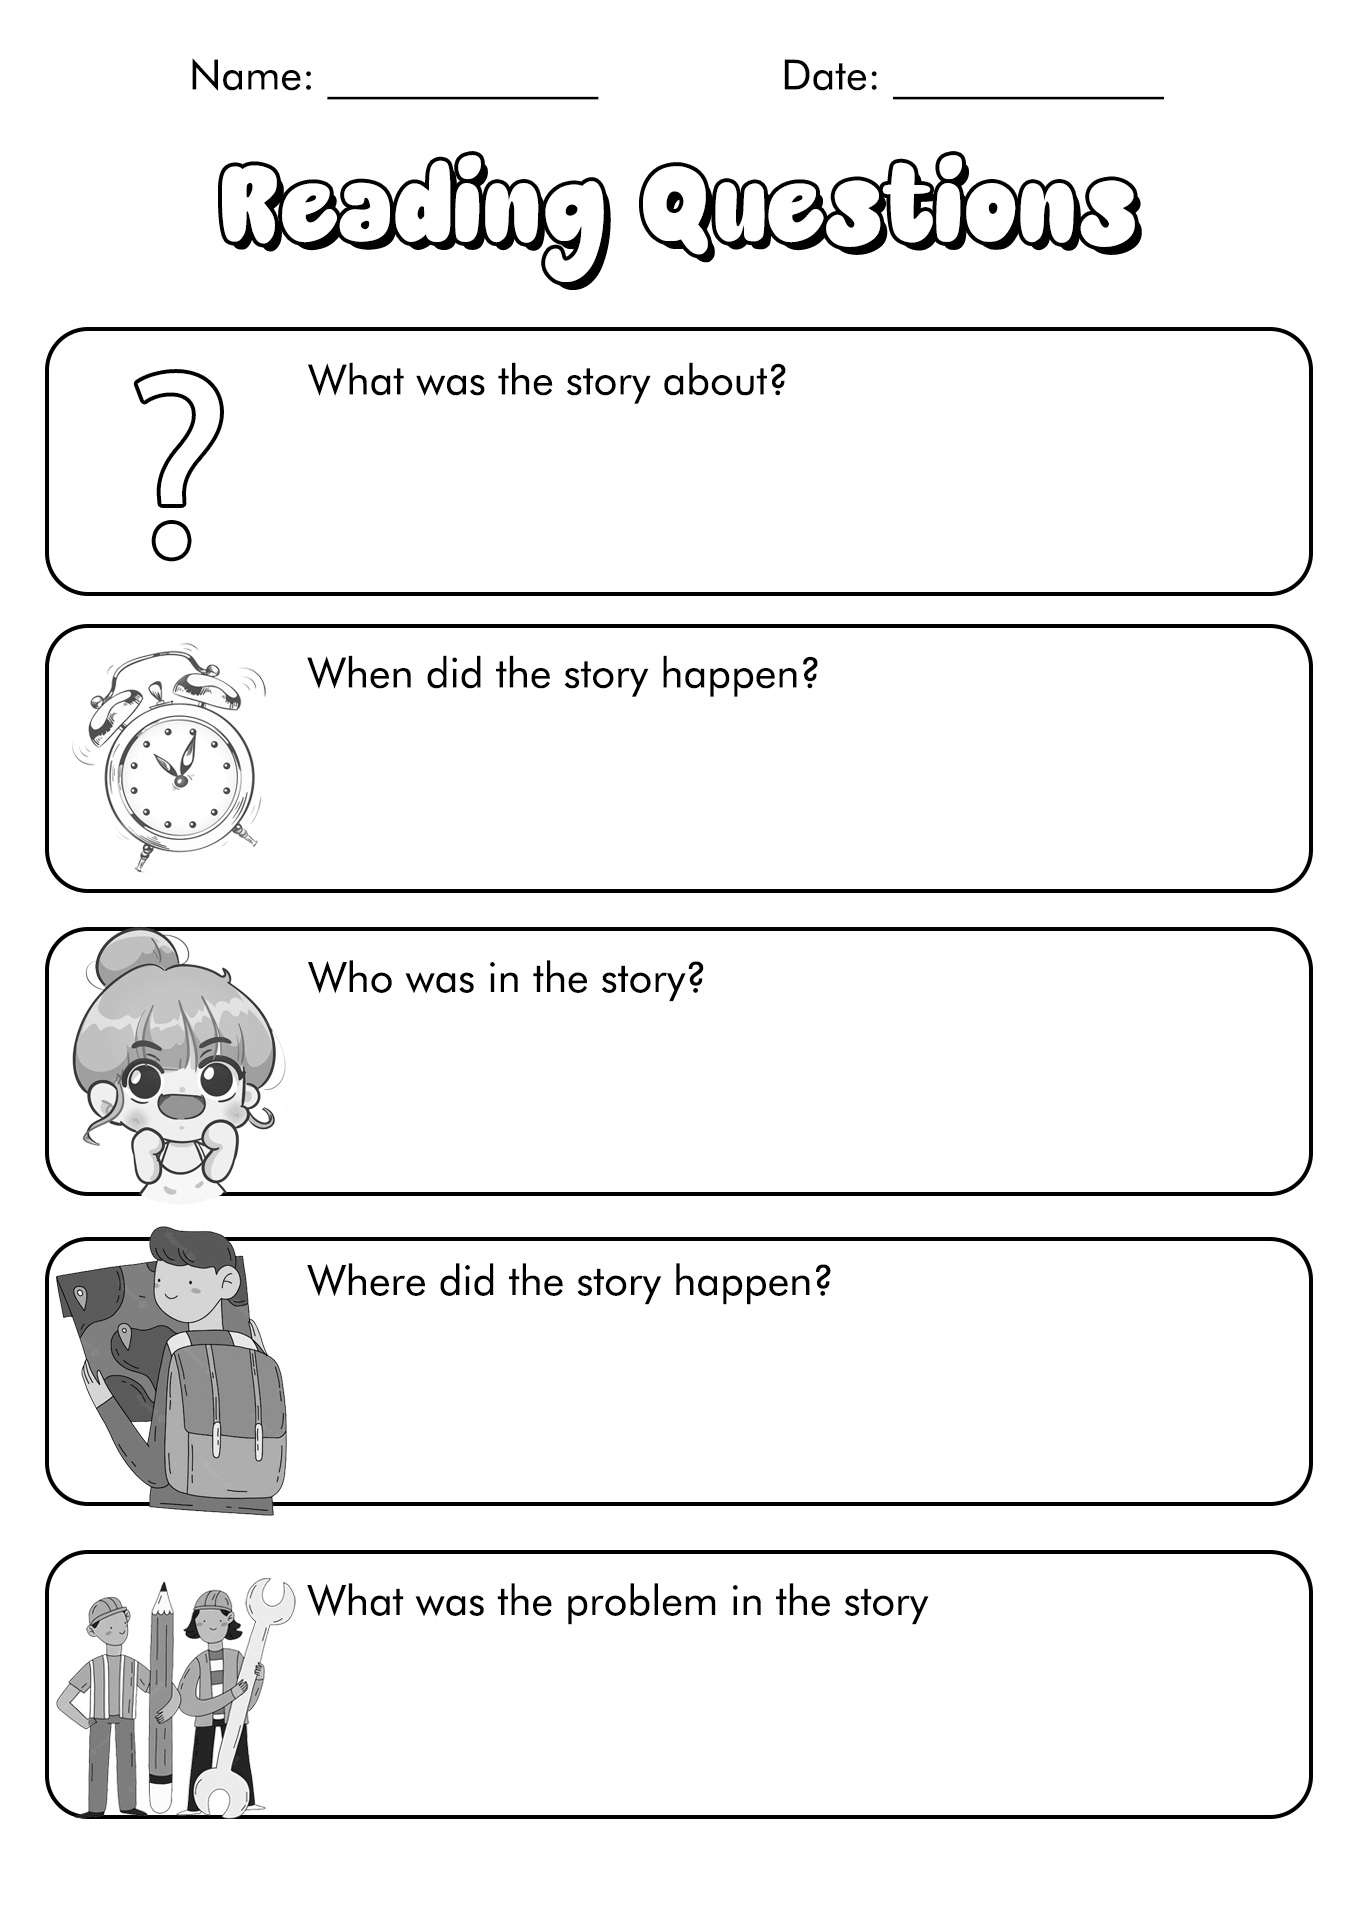 get-4th-grade-reading-response-worksheets-background-reading